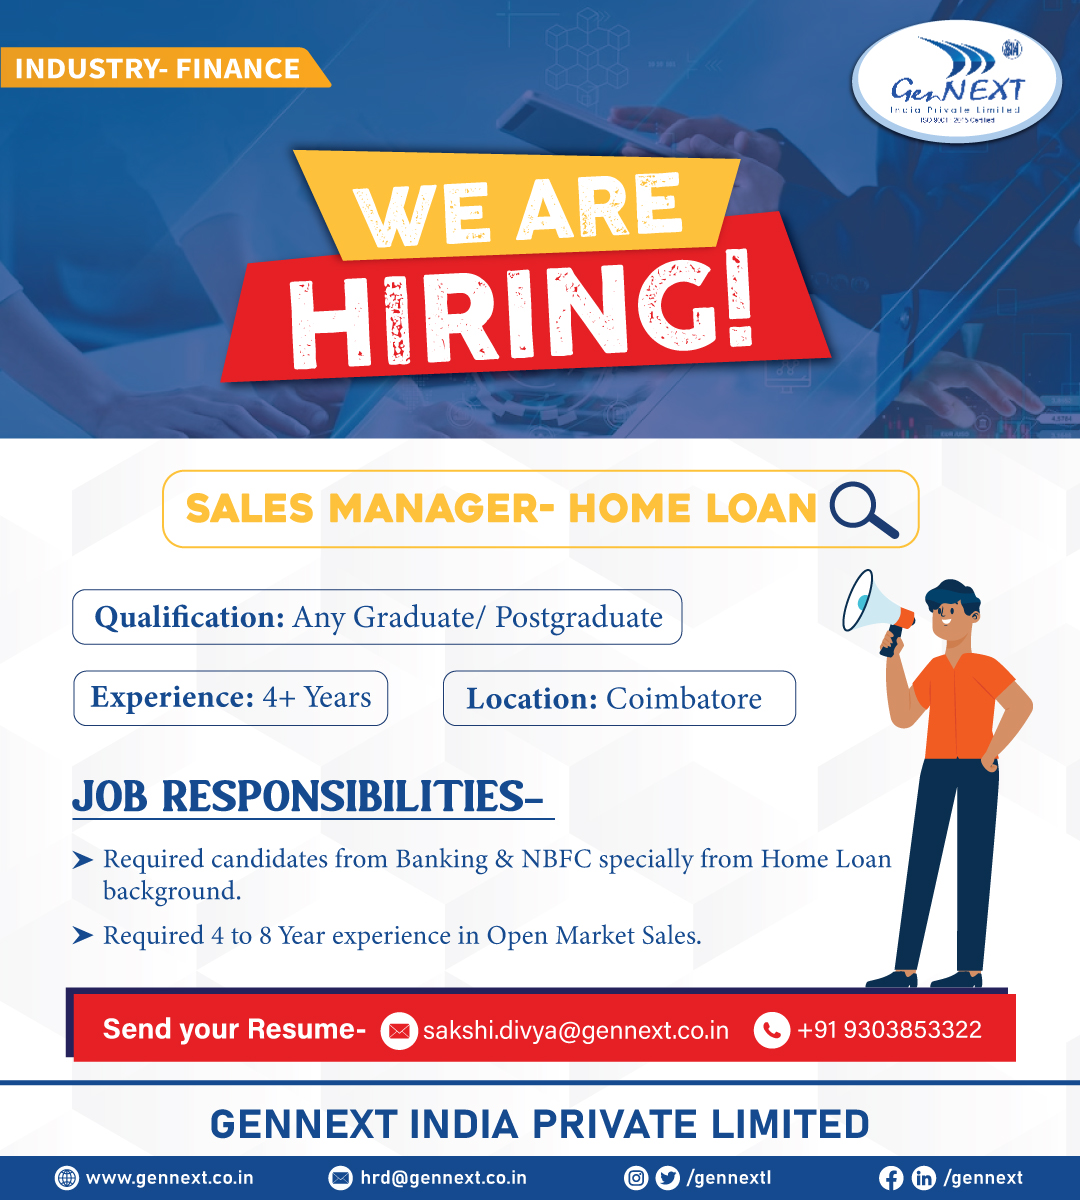 #UrgentHiring 💼📢🎯

Position: Sales Manager- Home loan
Location: Coimbatore

#SalesManager #Homeloan #Graduate #postgraduate #hiringnow #jobsearching #jobsearch #Recruitment2024 #jobvacancy2024 #nowhiring #recruiting #gennextjob #gennexthiring #GenNext #hiring2024